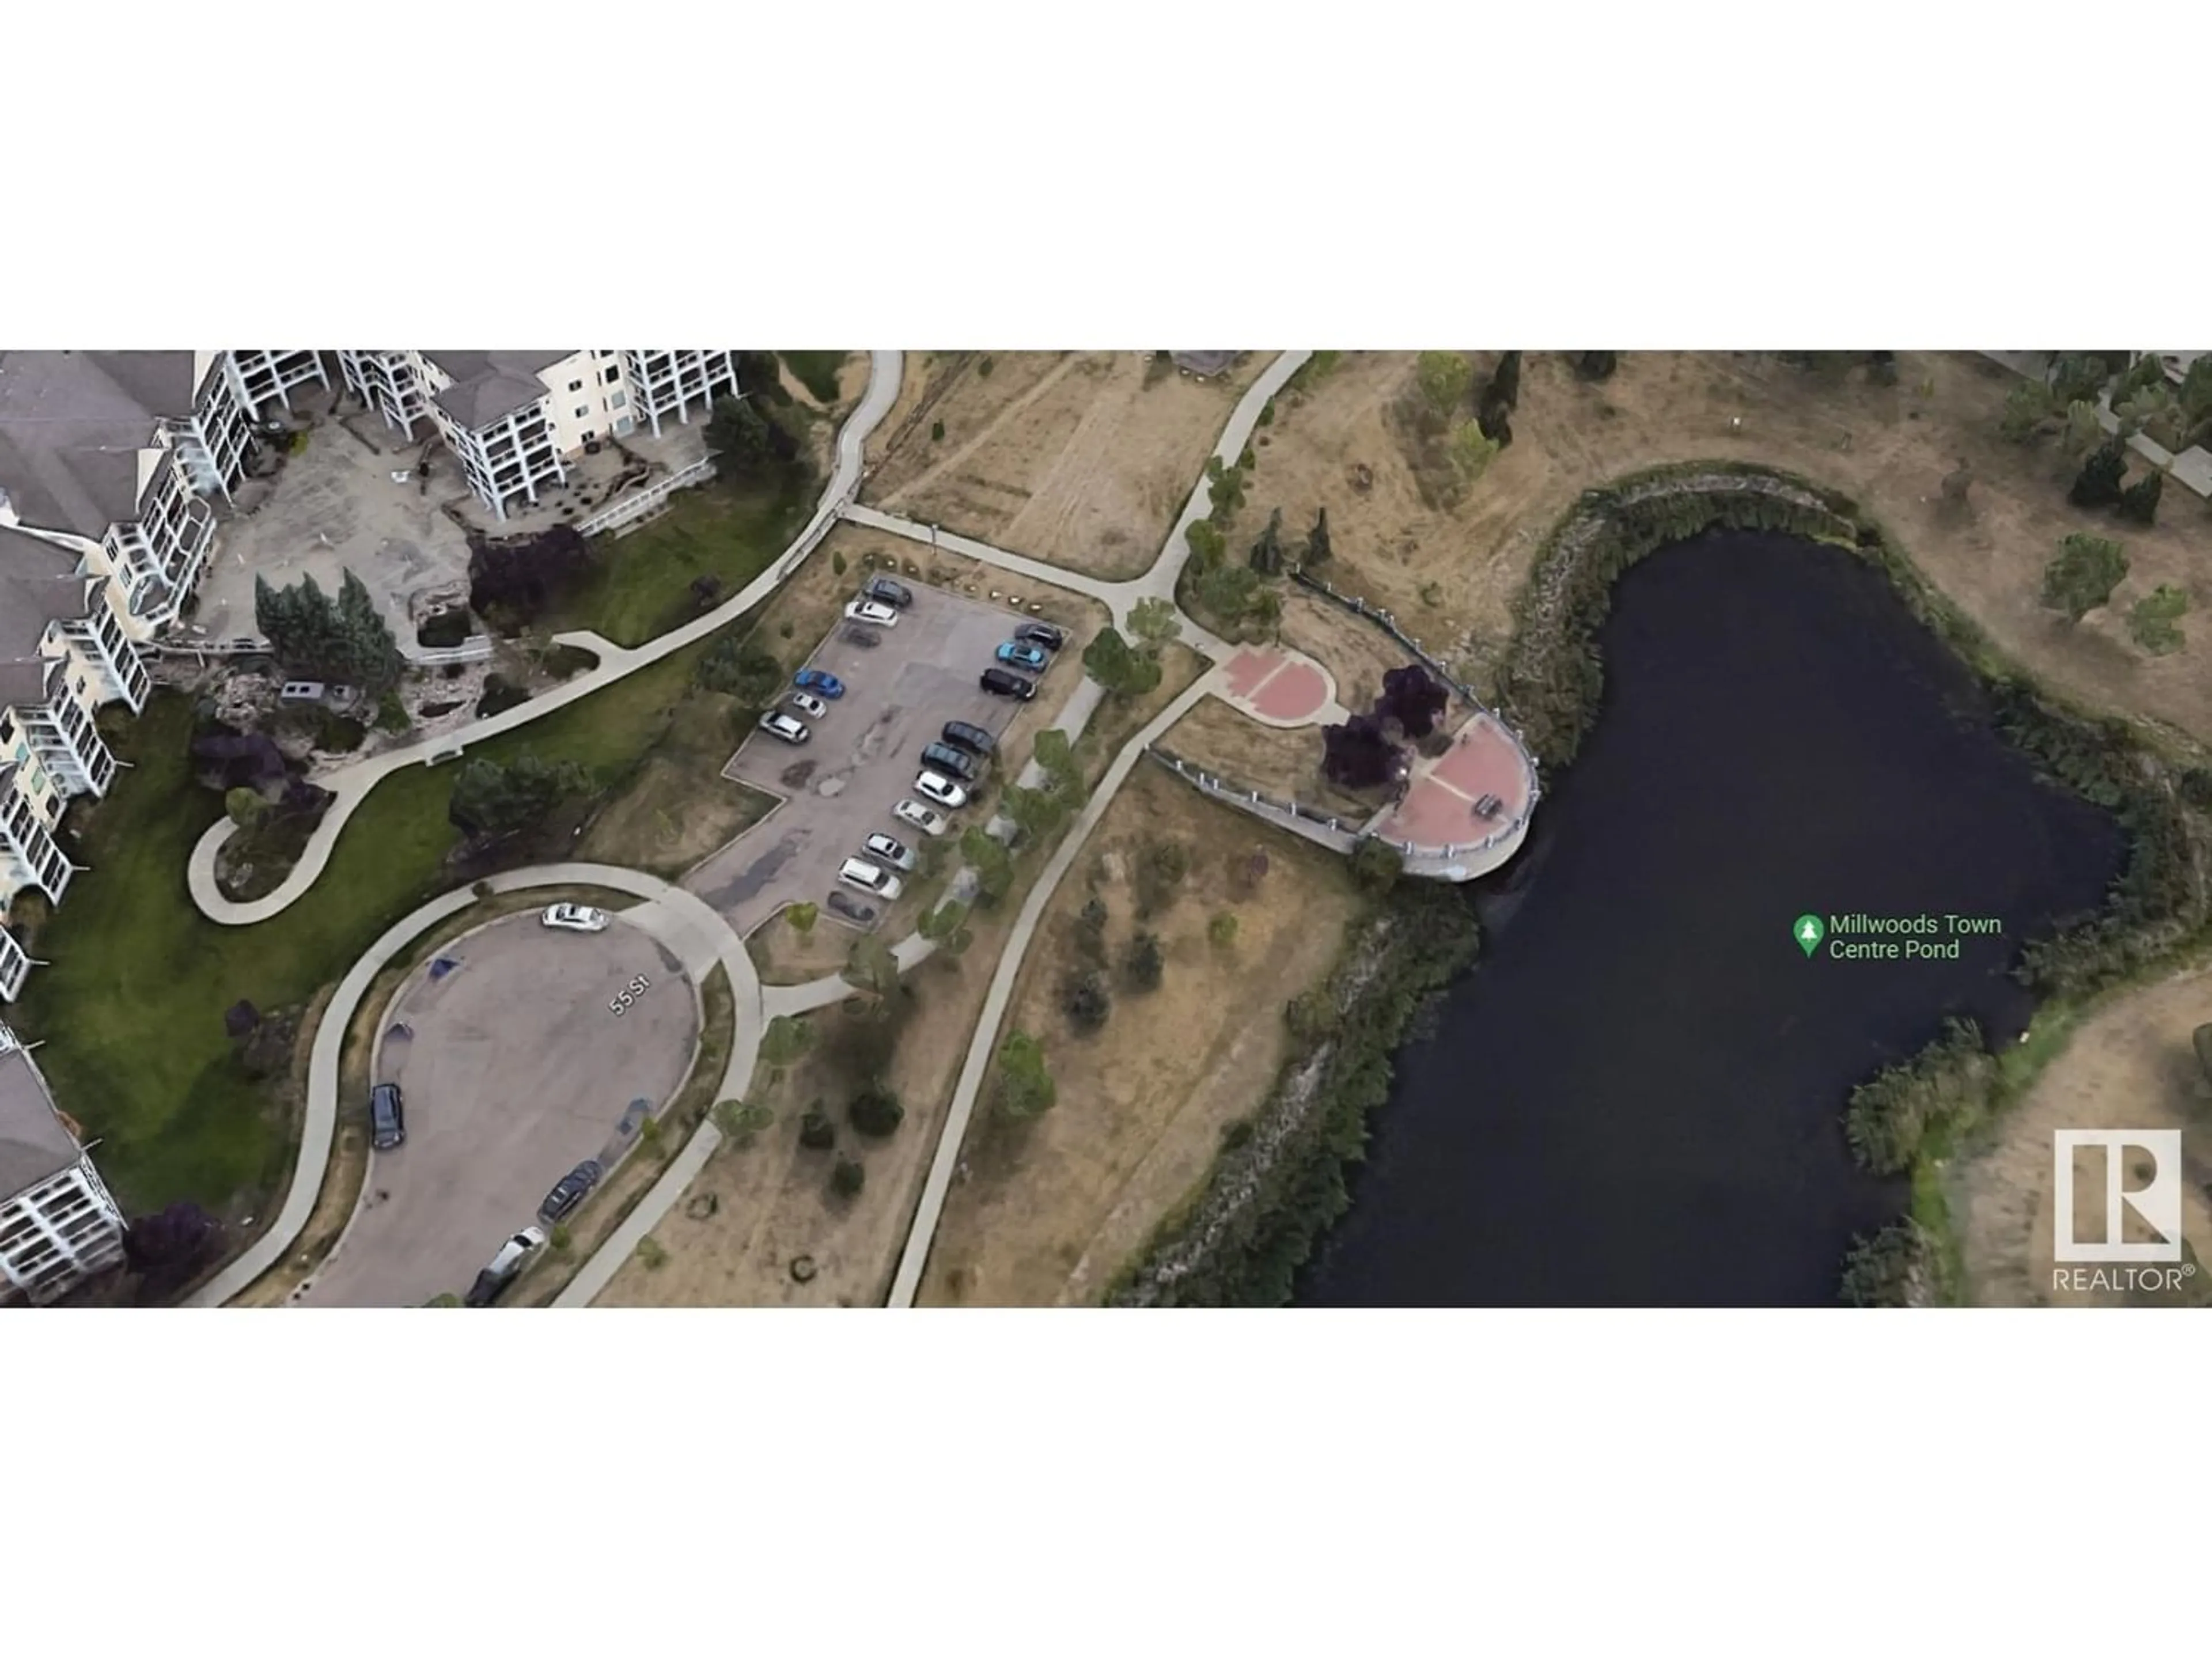 Picture of a map for #214 2741 55 ST NW, Edmonton Alberta T6L7G7